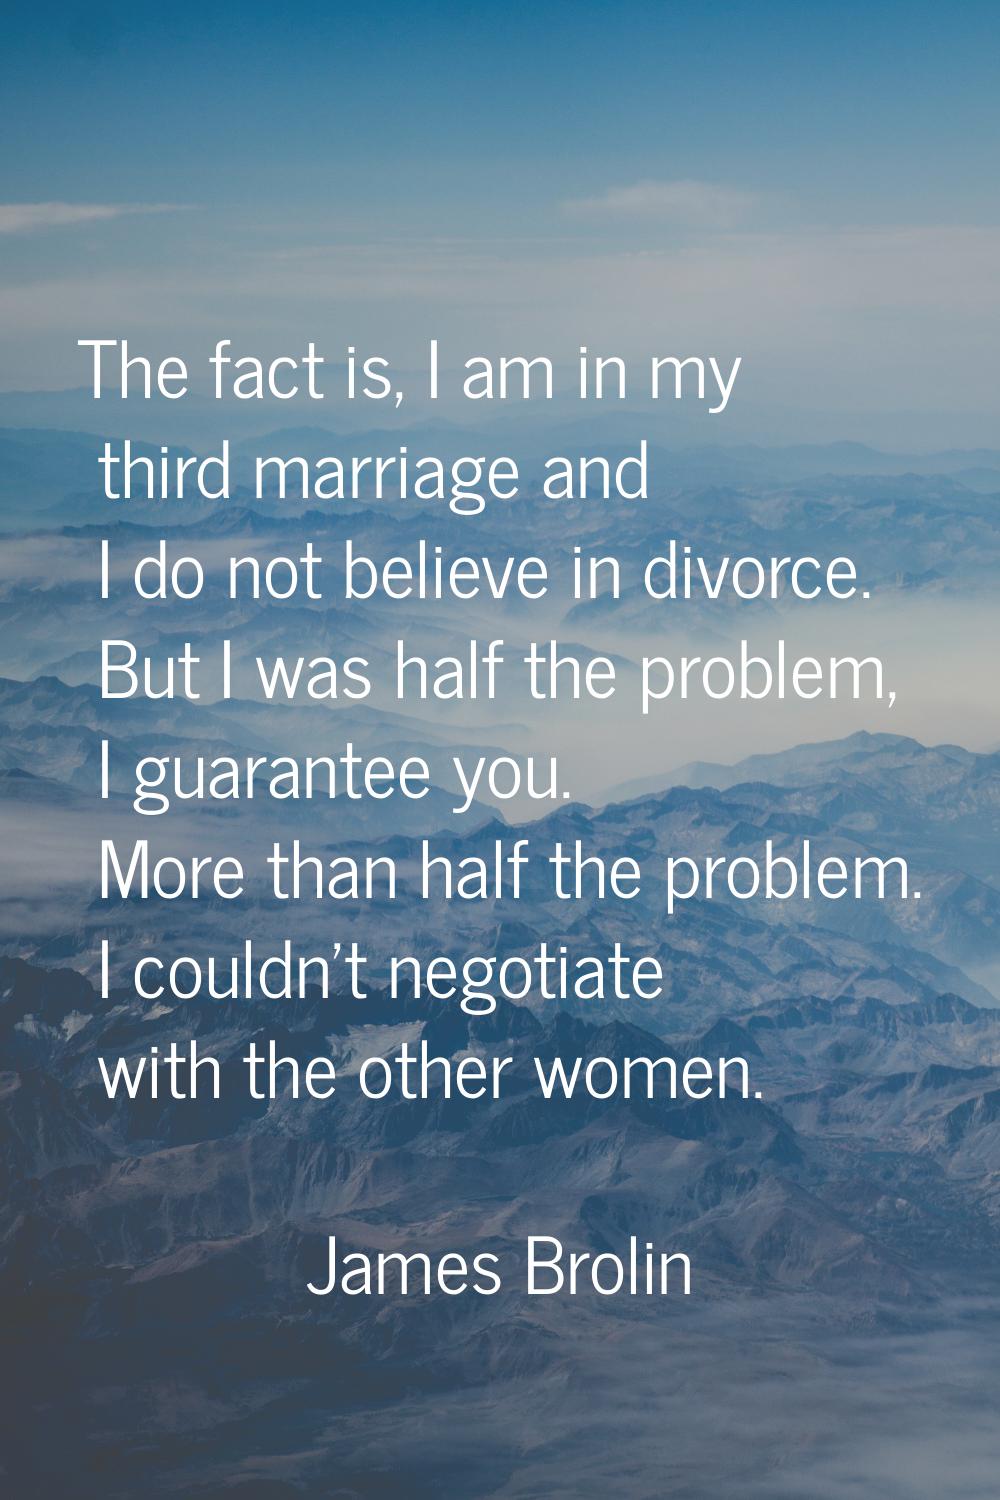 The fact is, I am in my third marriage and I do not believe in divorce. But I was half the problem,